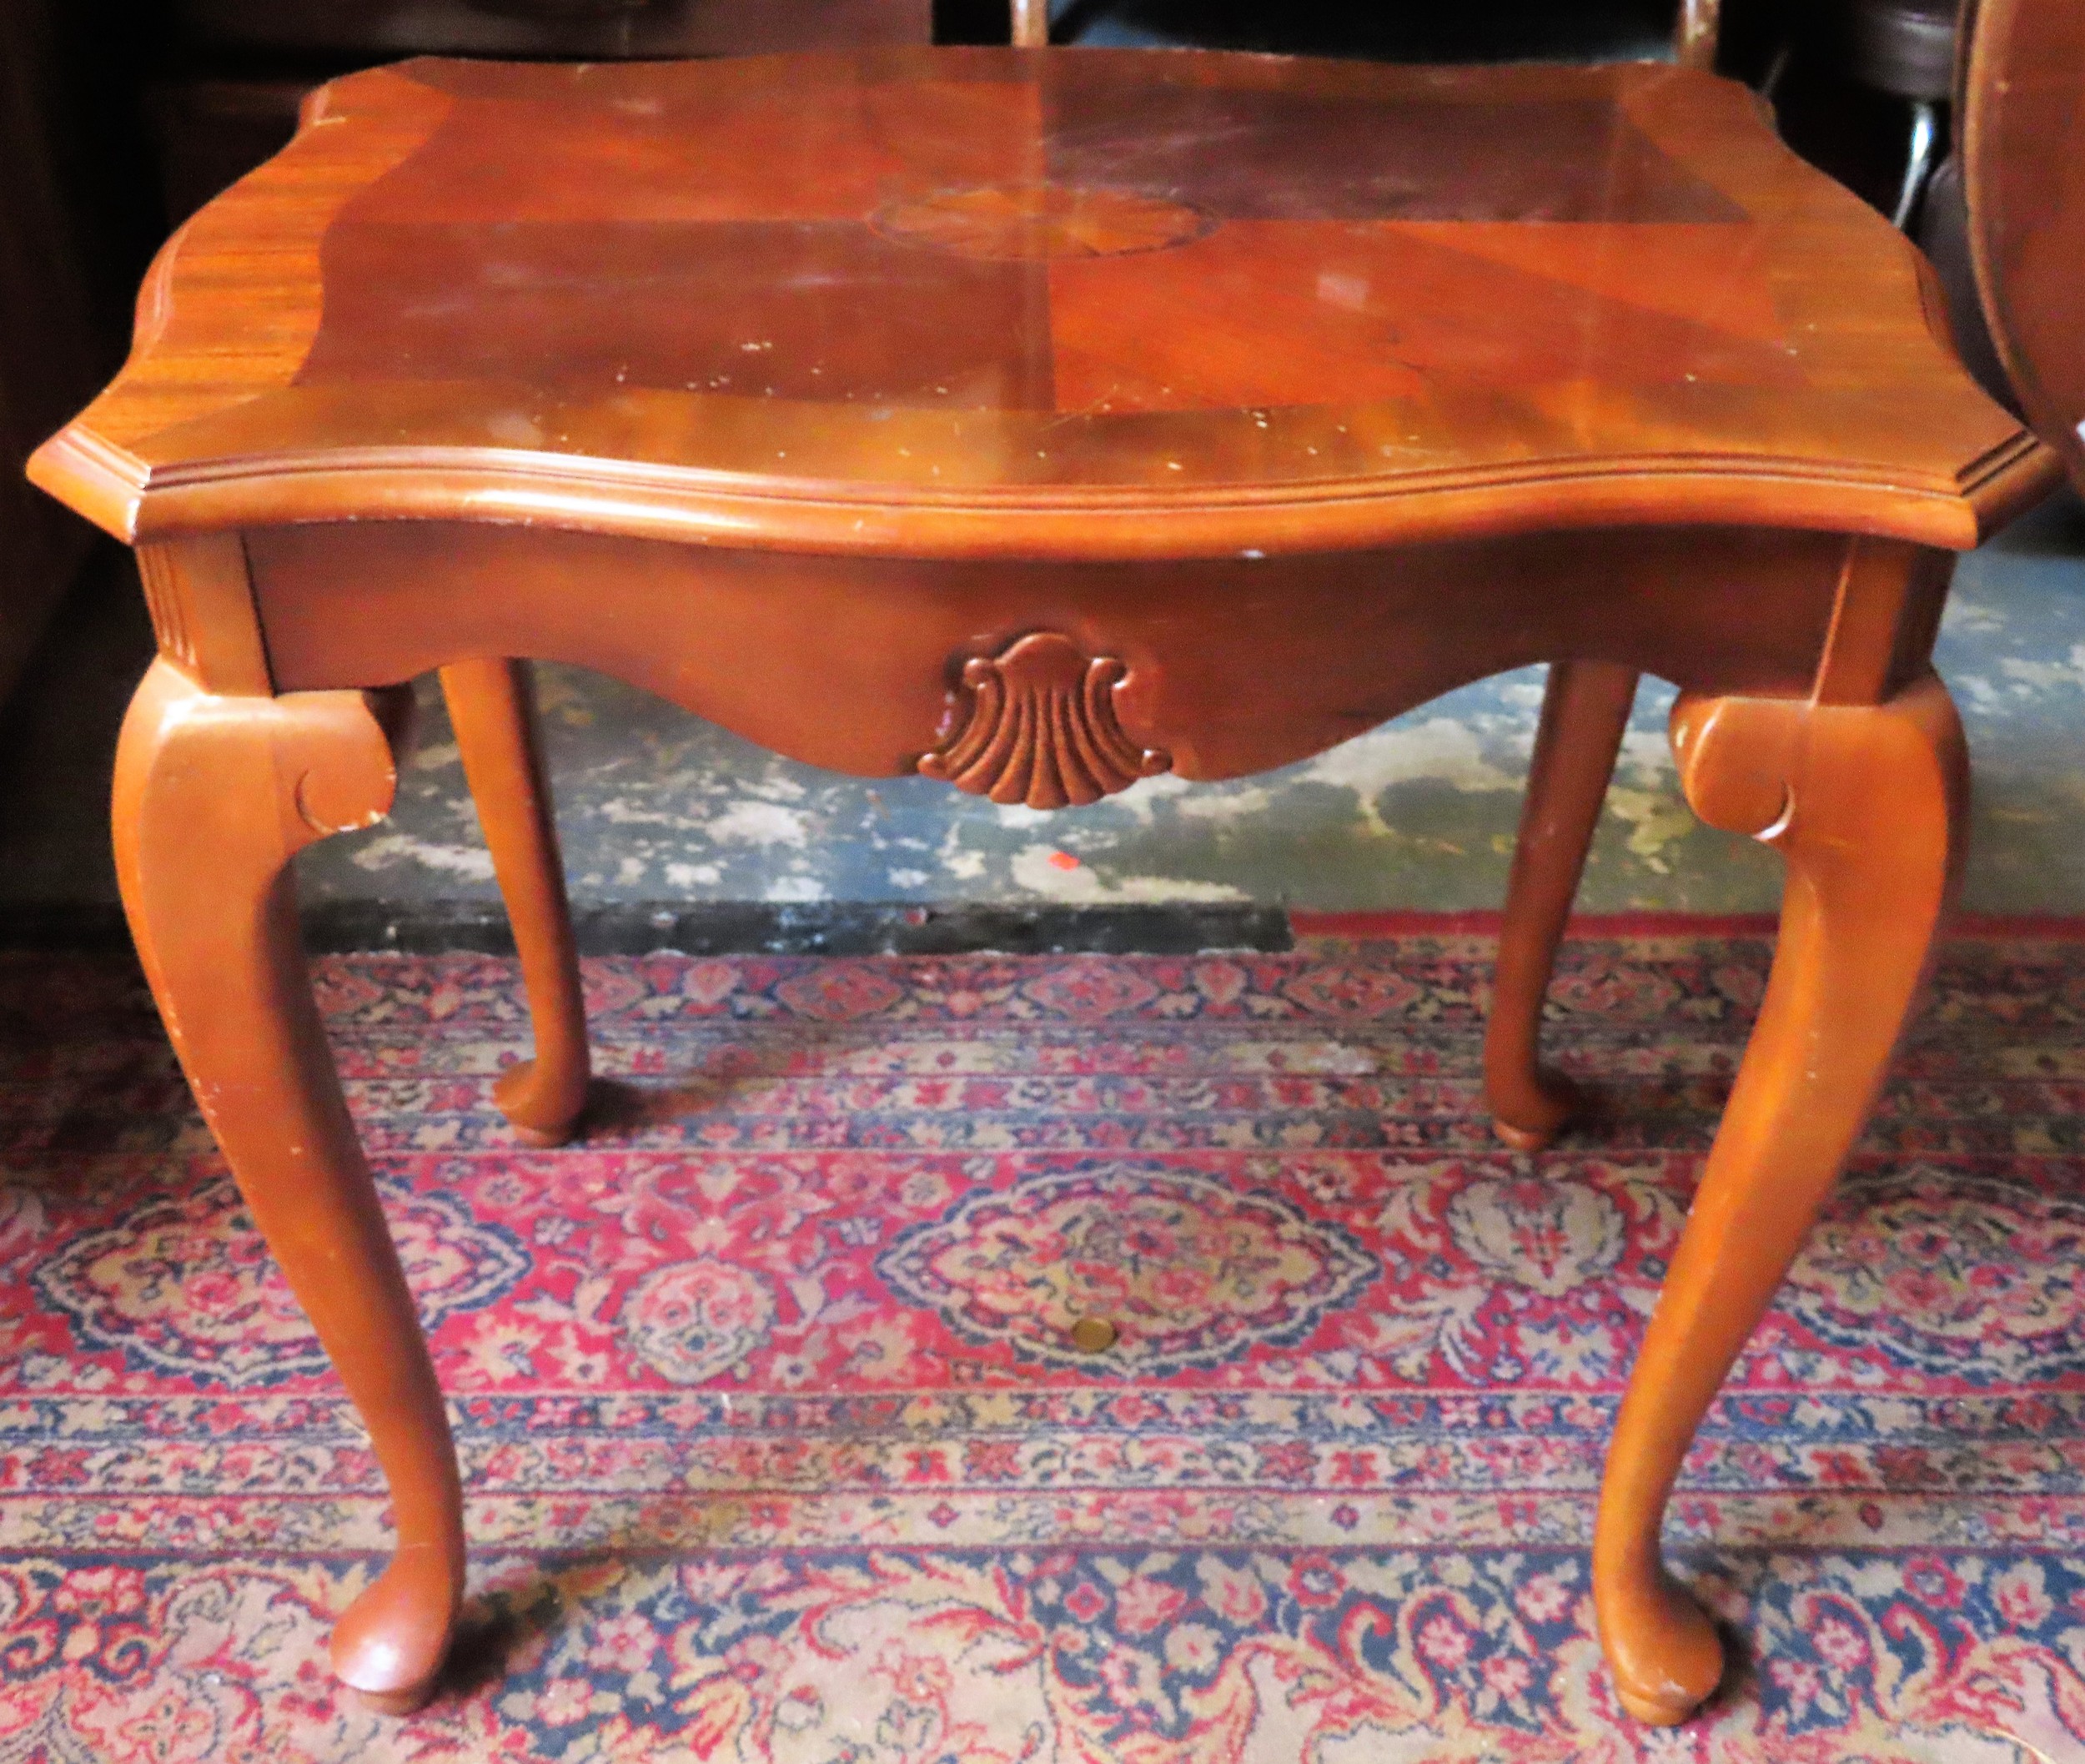 20th century Italian inlaid side table with brush and slide. App. 65cm H x 69cm W x 49cm D